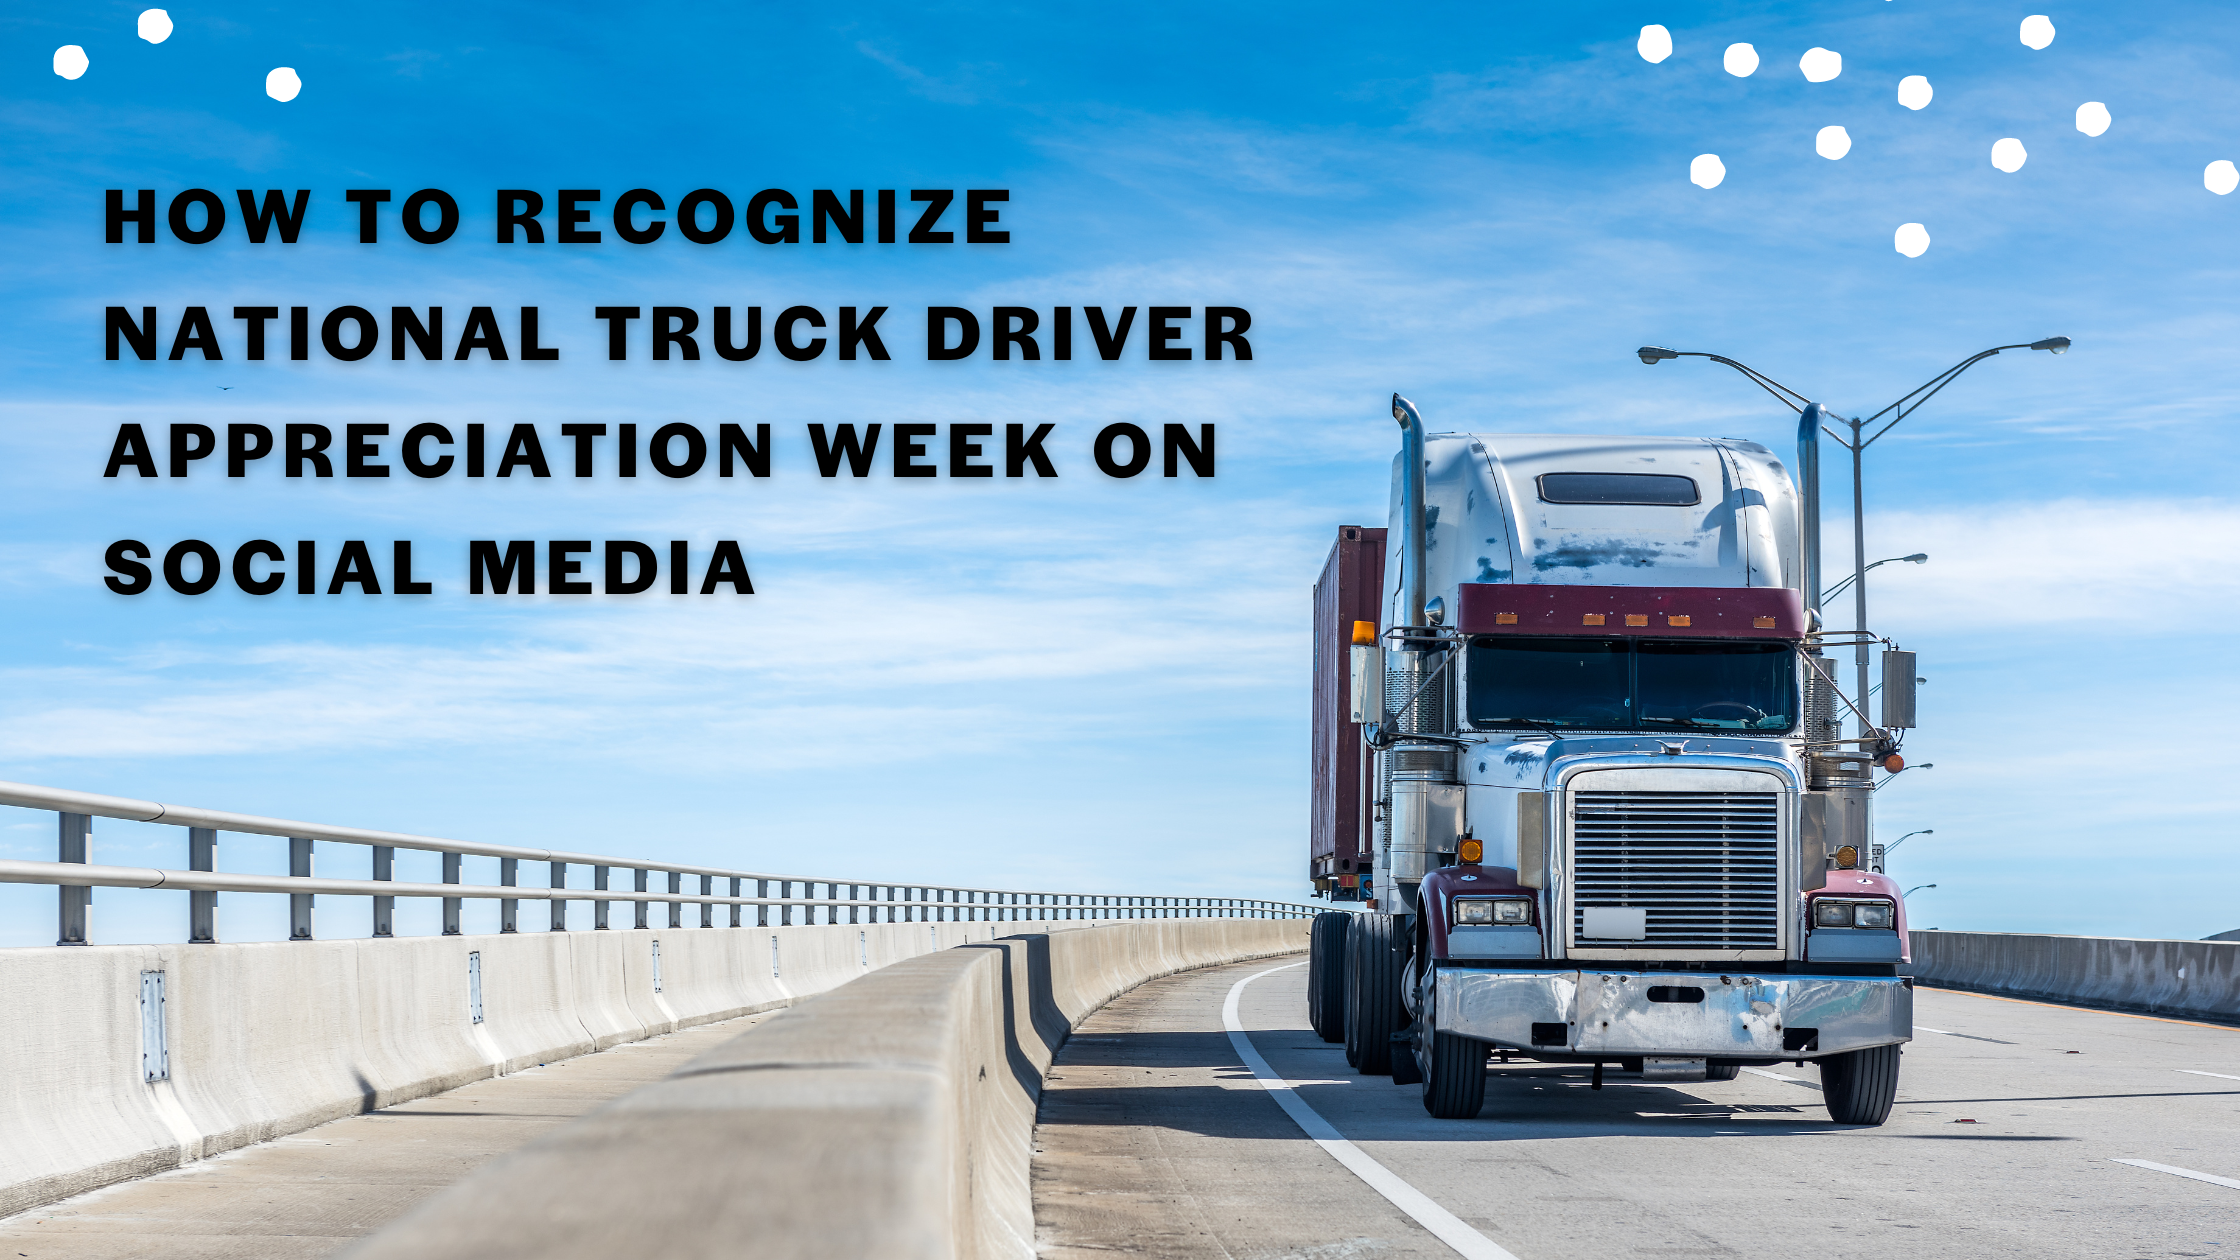 How to Recognize National Truck Driver Appreciation Week on Social Media